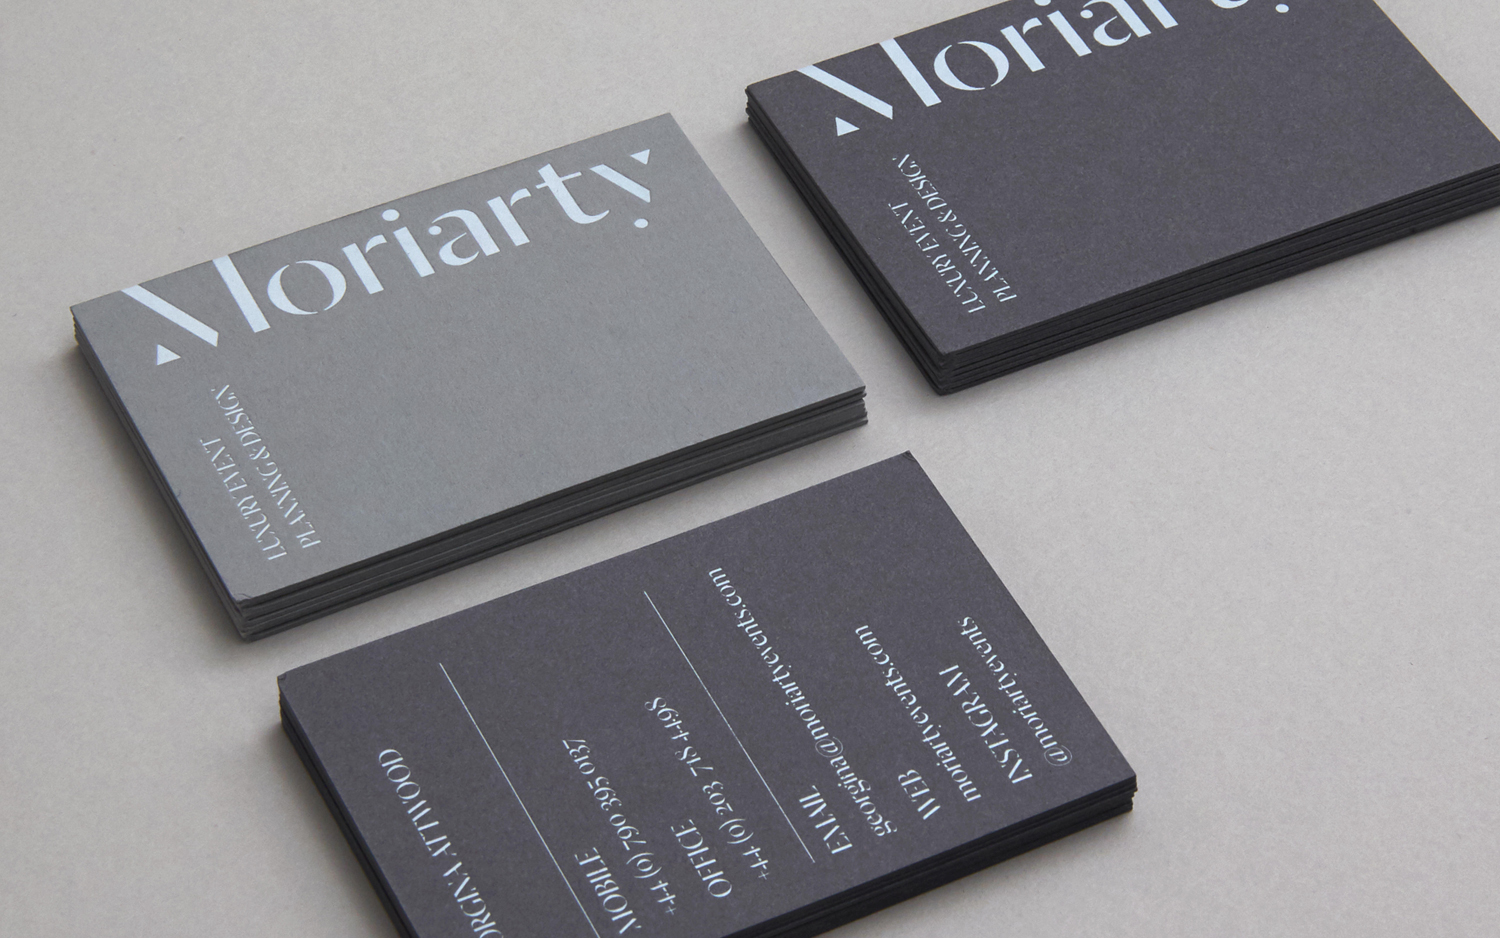 Visual identity and grey business cards with a white block foil detail designed by Bond for London-based event planning business Moriarty